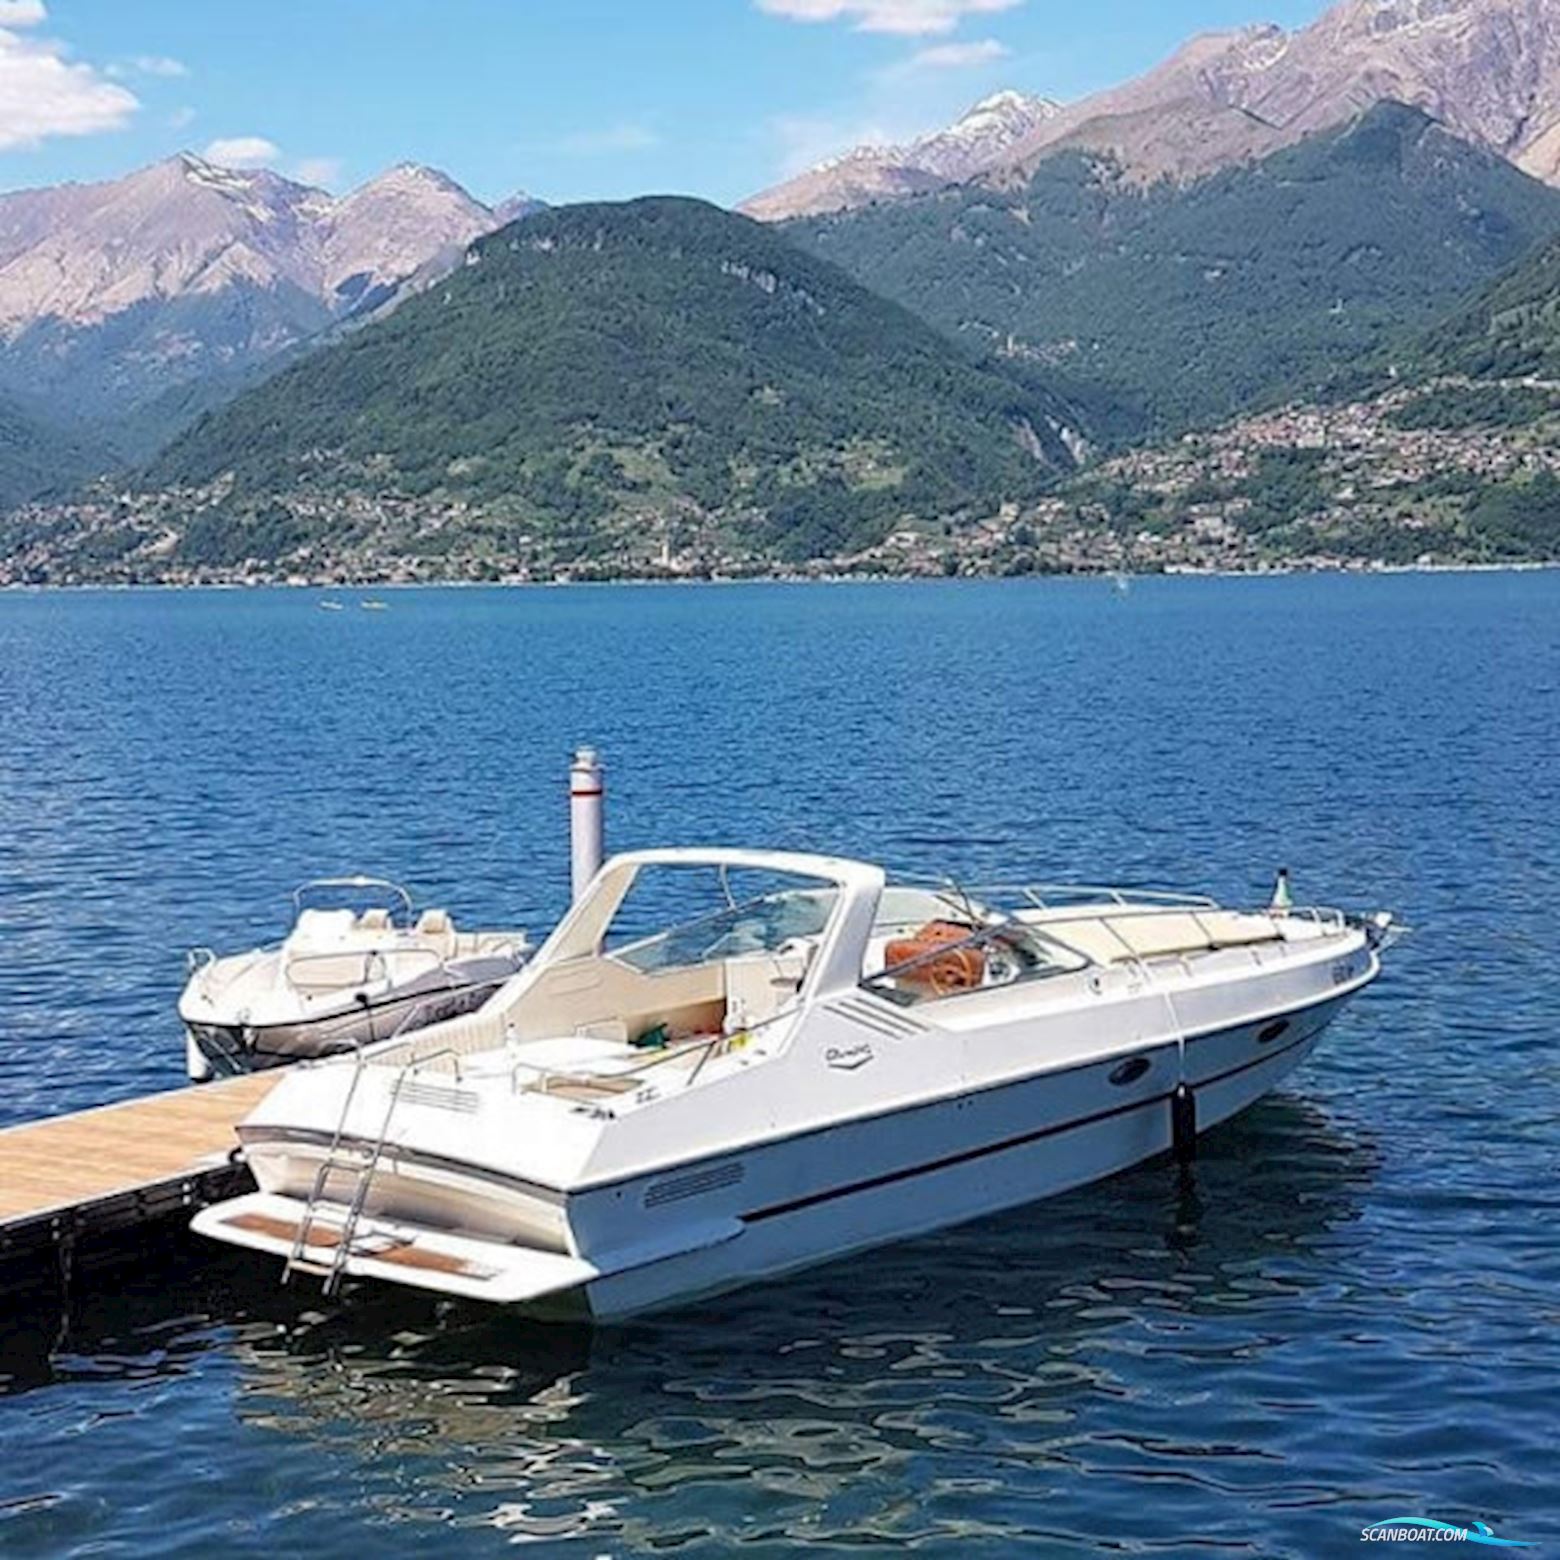 Colombo 36 Motor boat 1991, with Volvo Penta engine, Italy